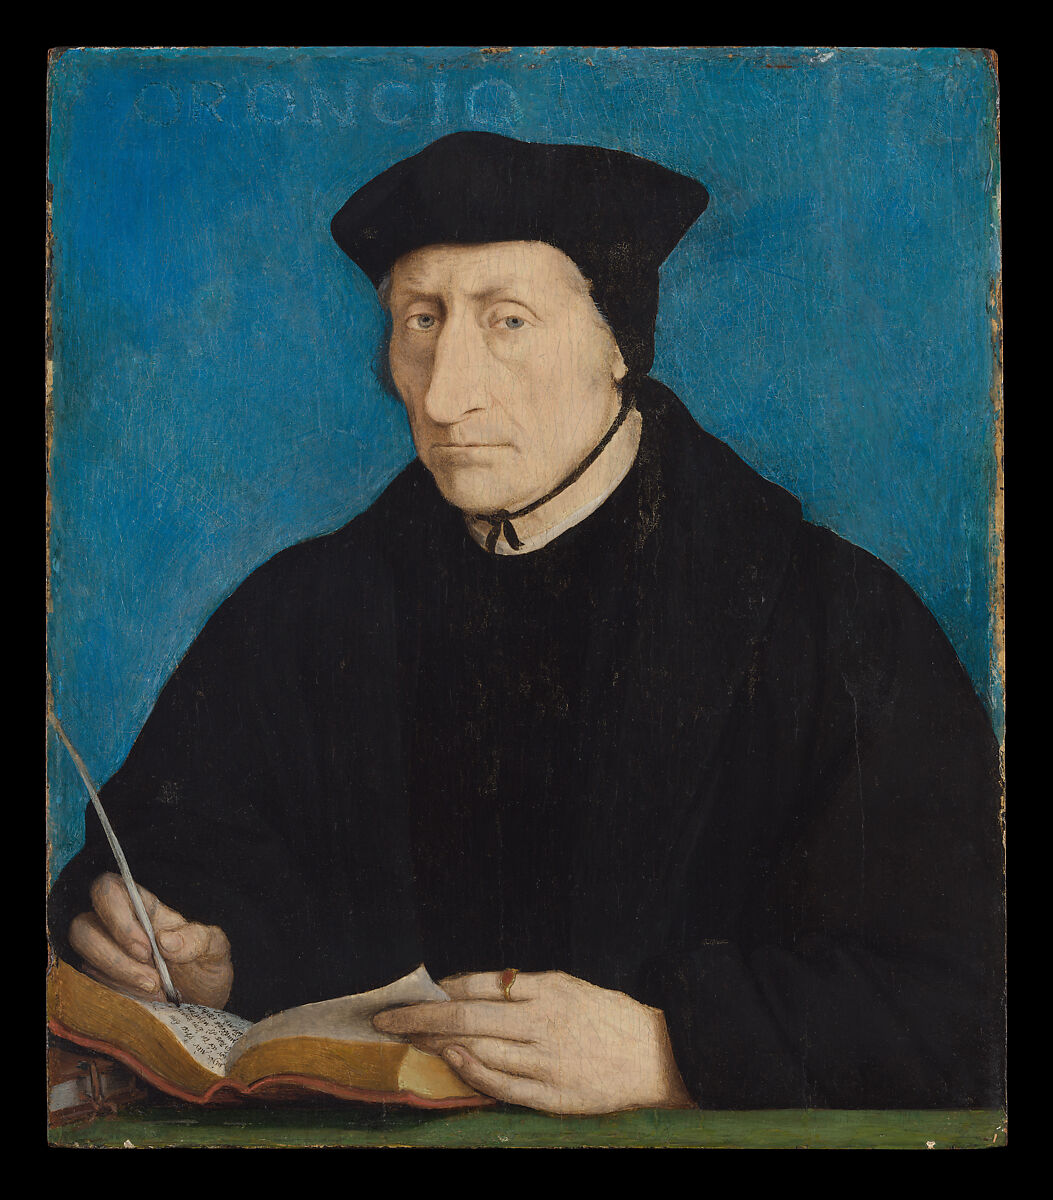 Guillaume Budé (1467–1540), Jean Clouet (French, active by 1516–died 1540/41 Paris), Oil on wood 